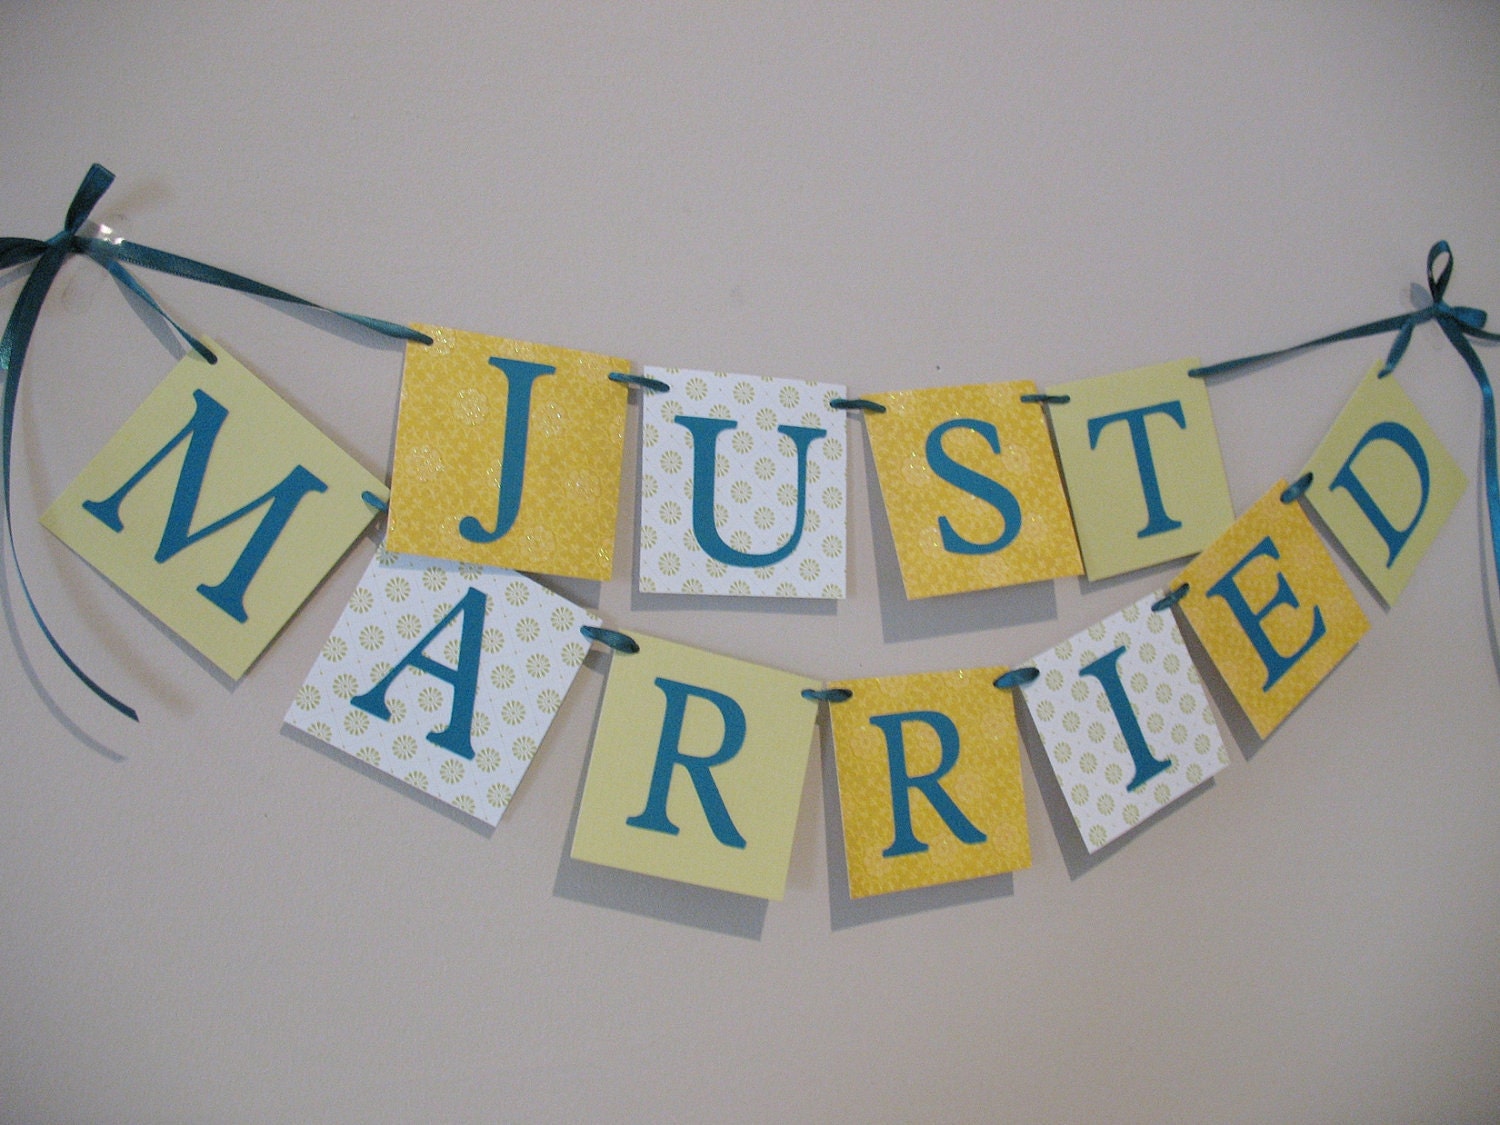 Just Married Wedding Banner From iecreations